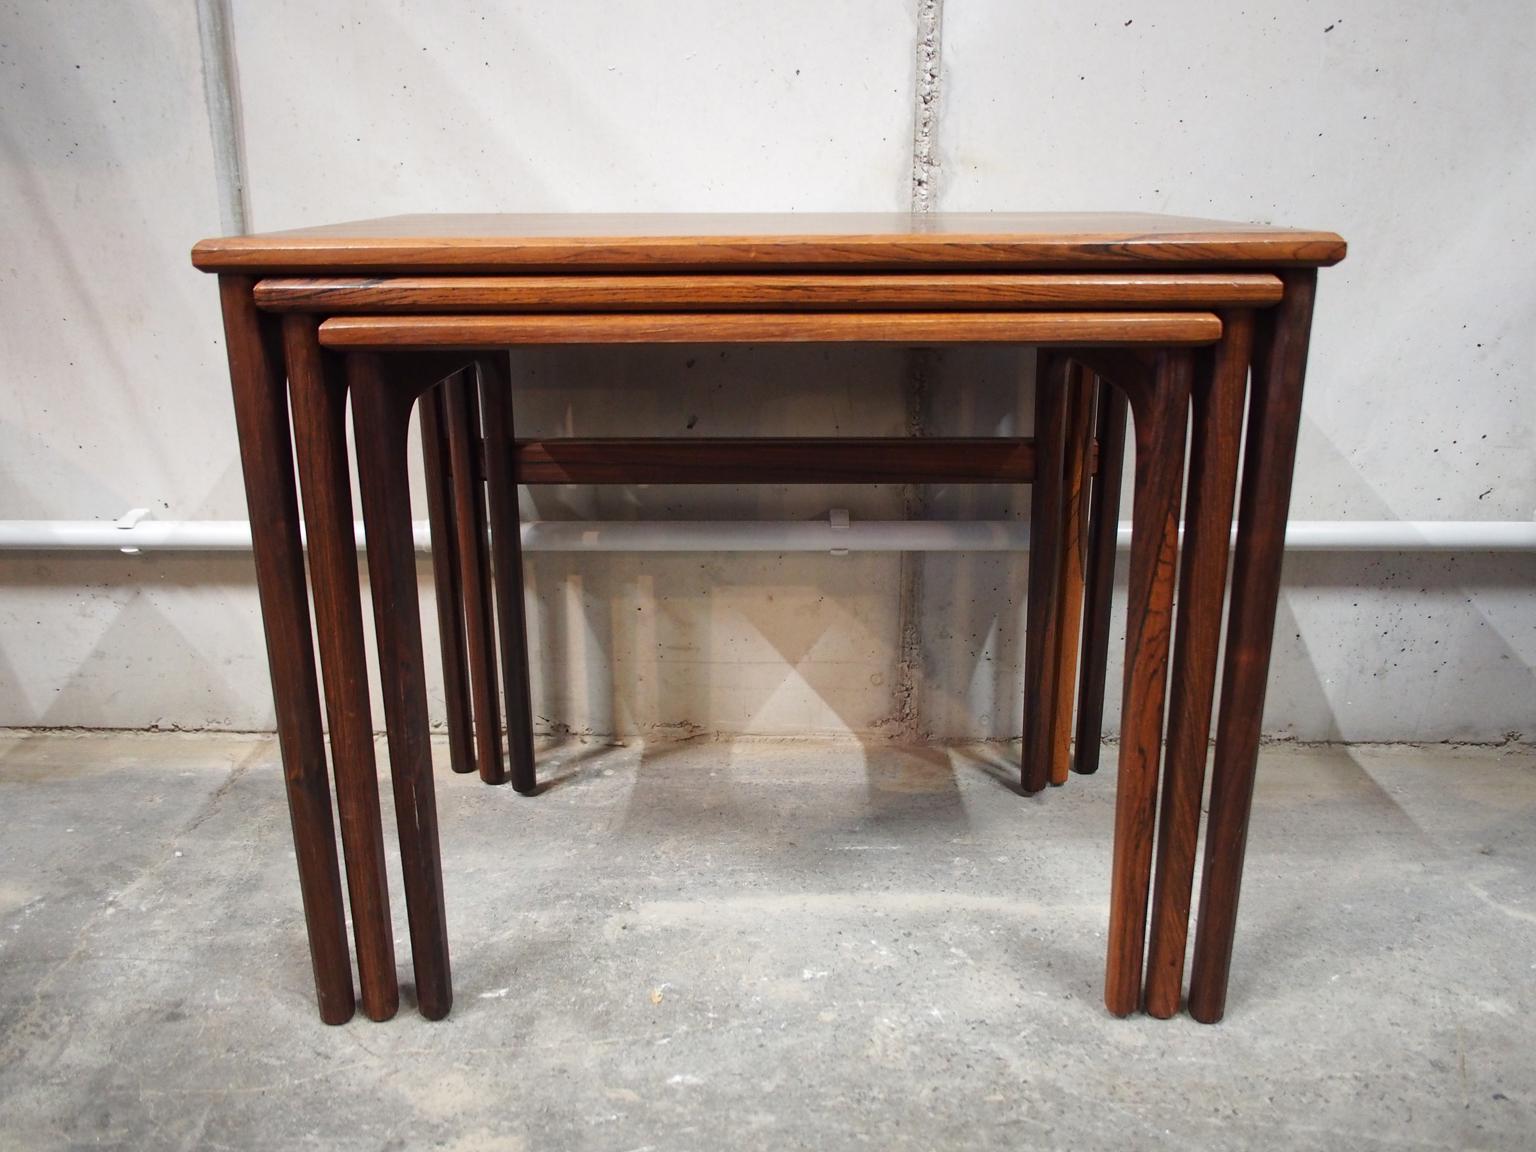 A set of three Danish/Scandinavian Modern nesting tables made of rosewood or palisander, manufactured in midcentury, circa 1960.